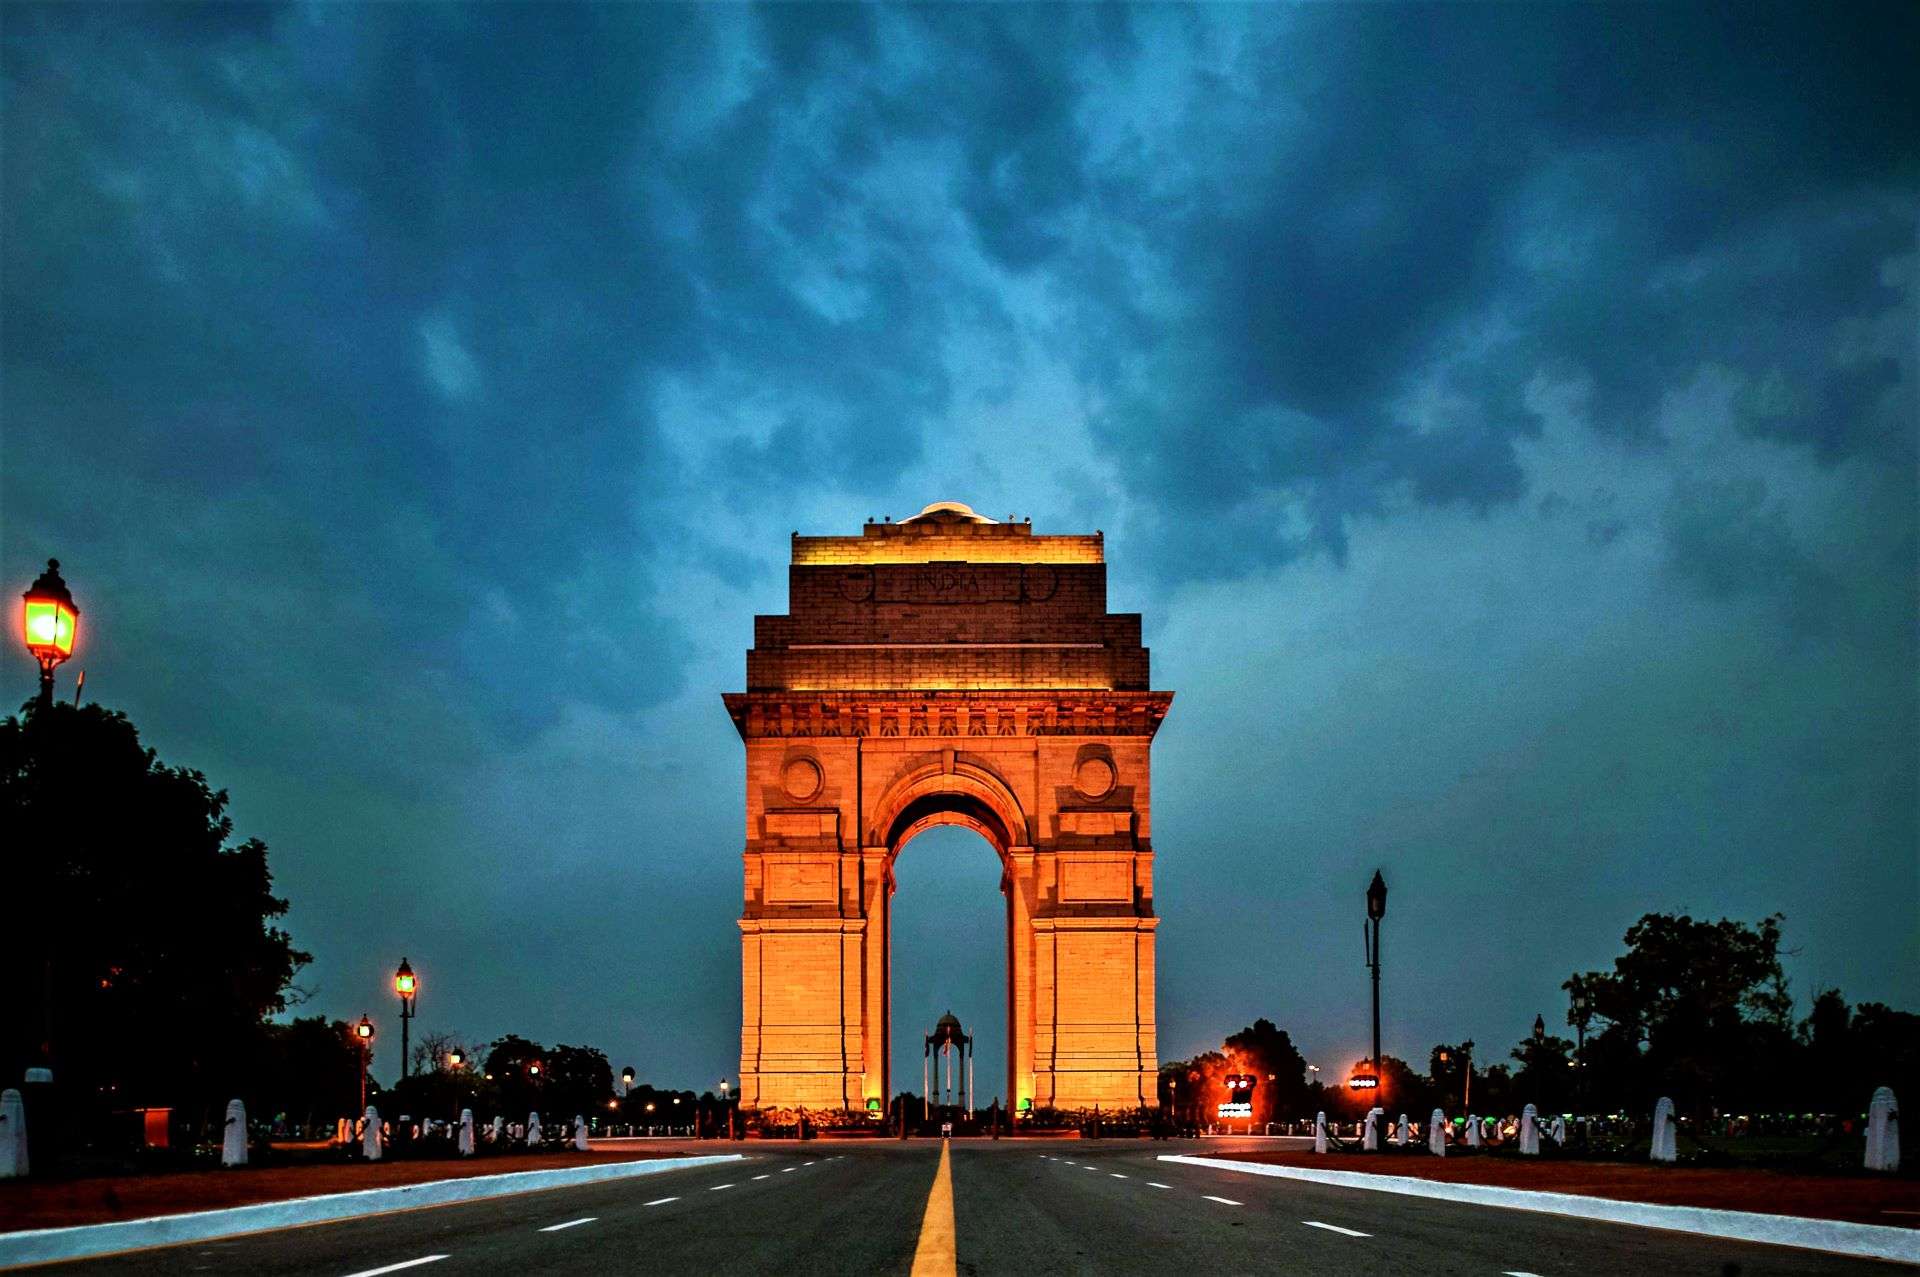 The front gate of New Delhi, India in the evening.